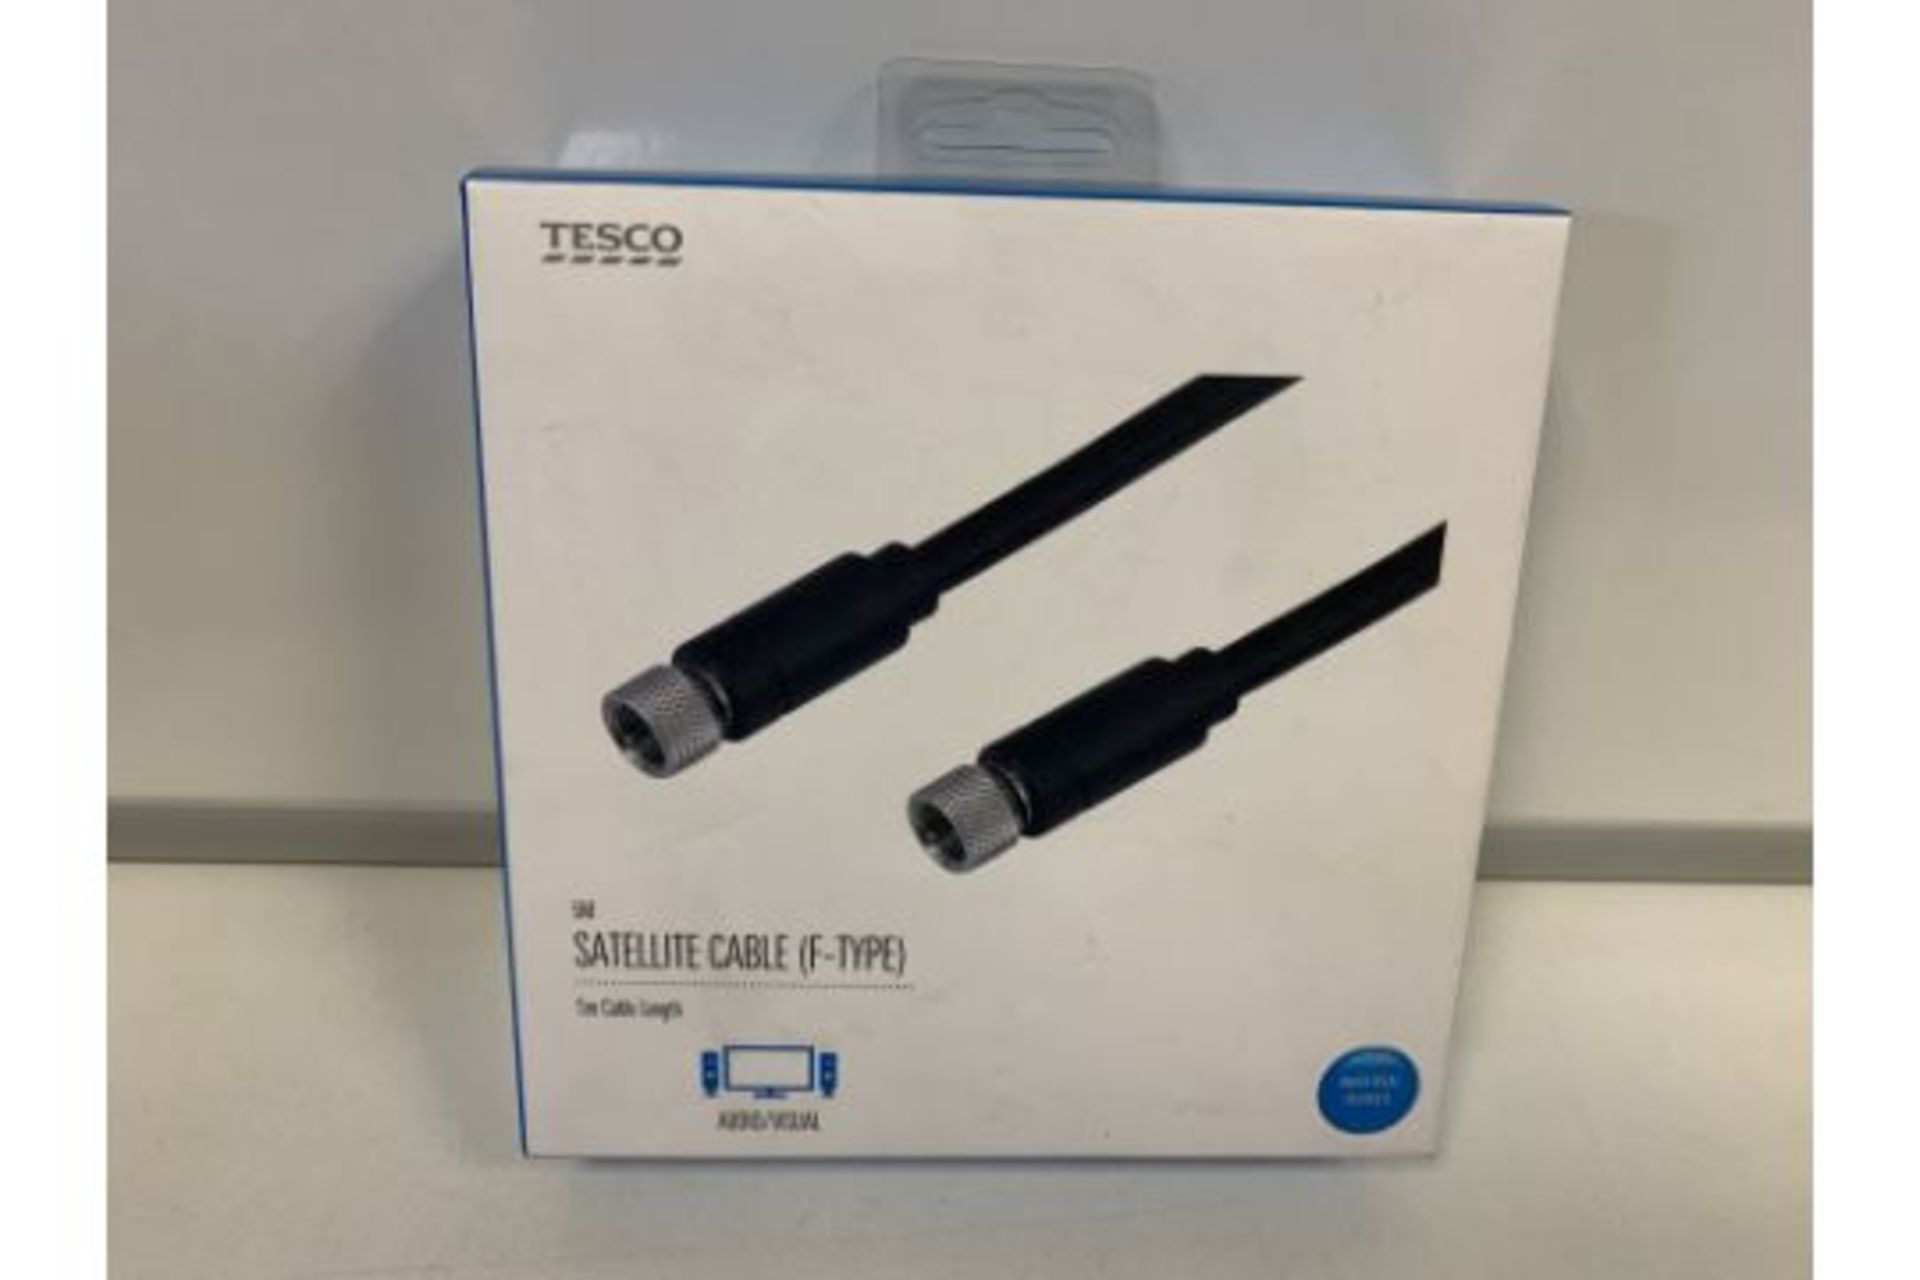 36 X BRAND NEW TESCO 5M STAELLITE CABLE (F-TYPE) (209/23)